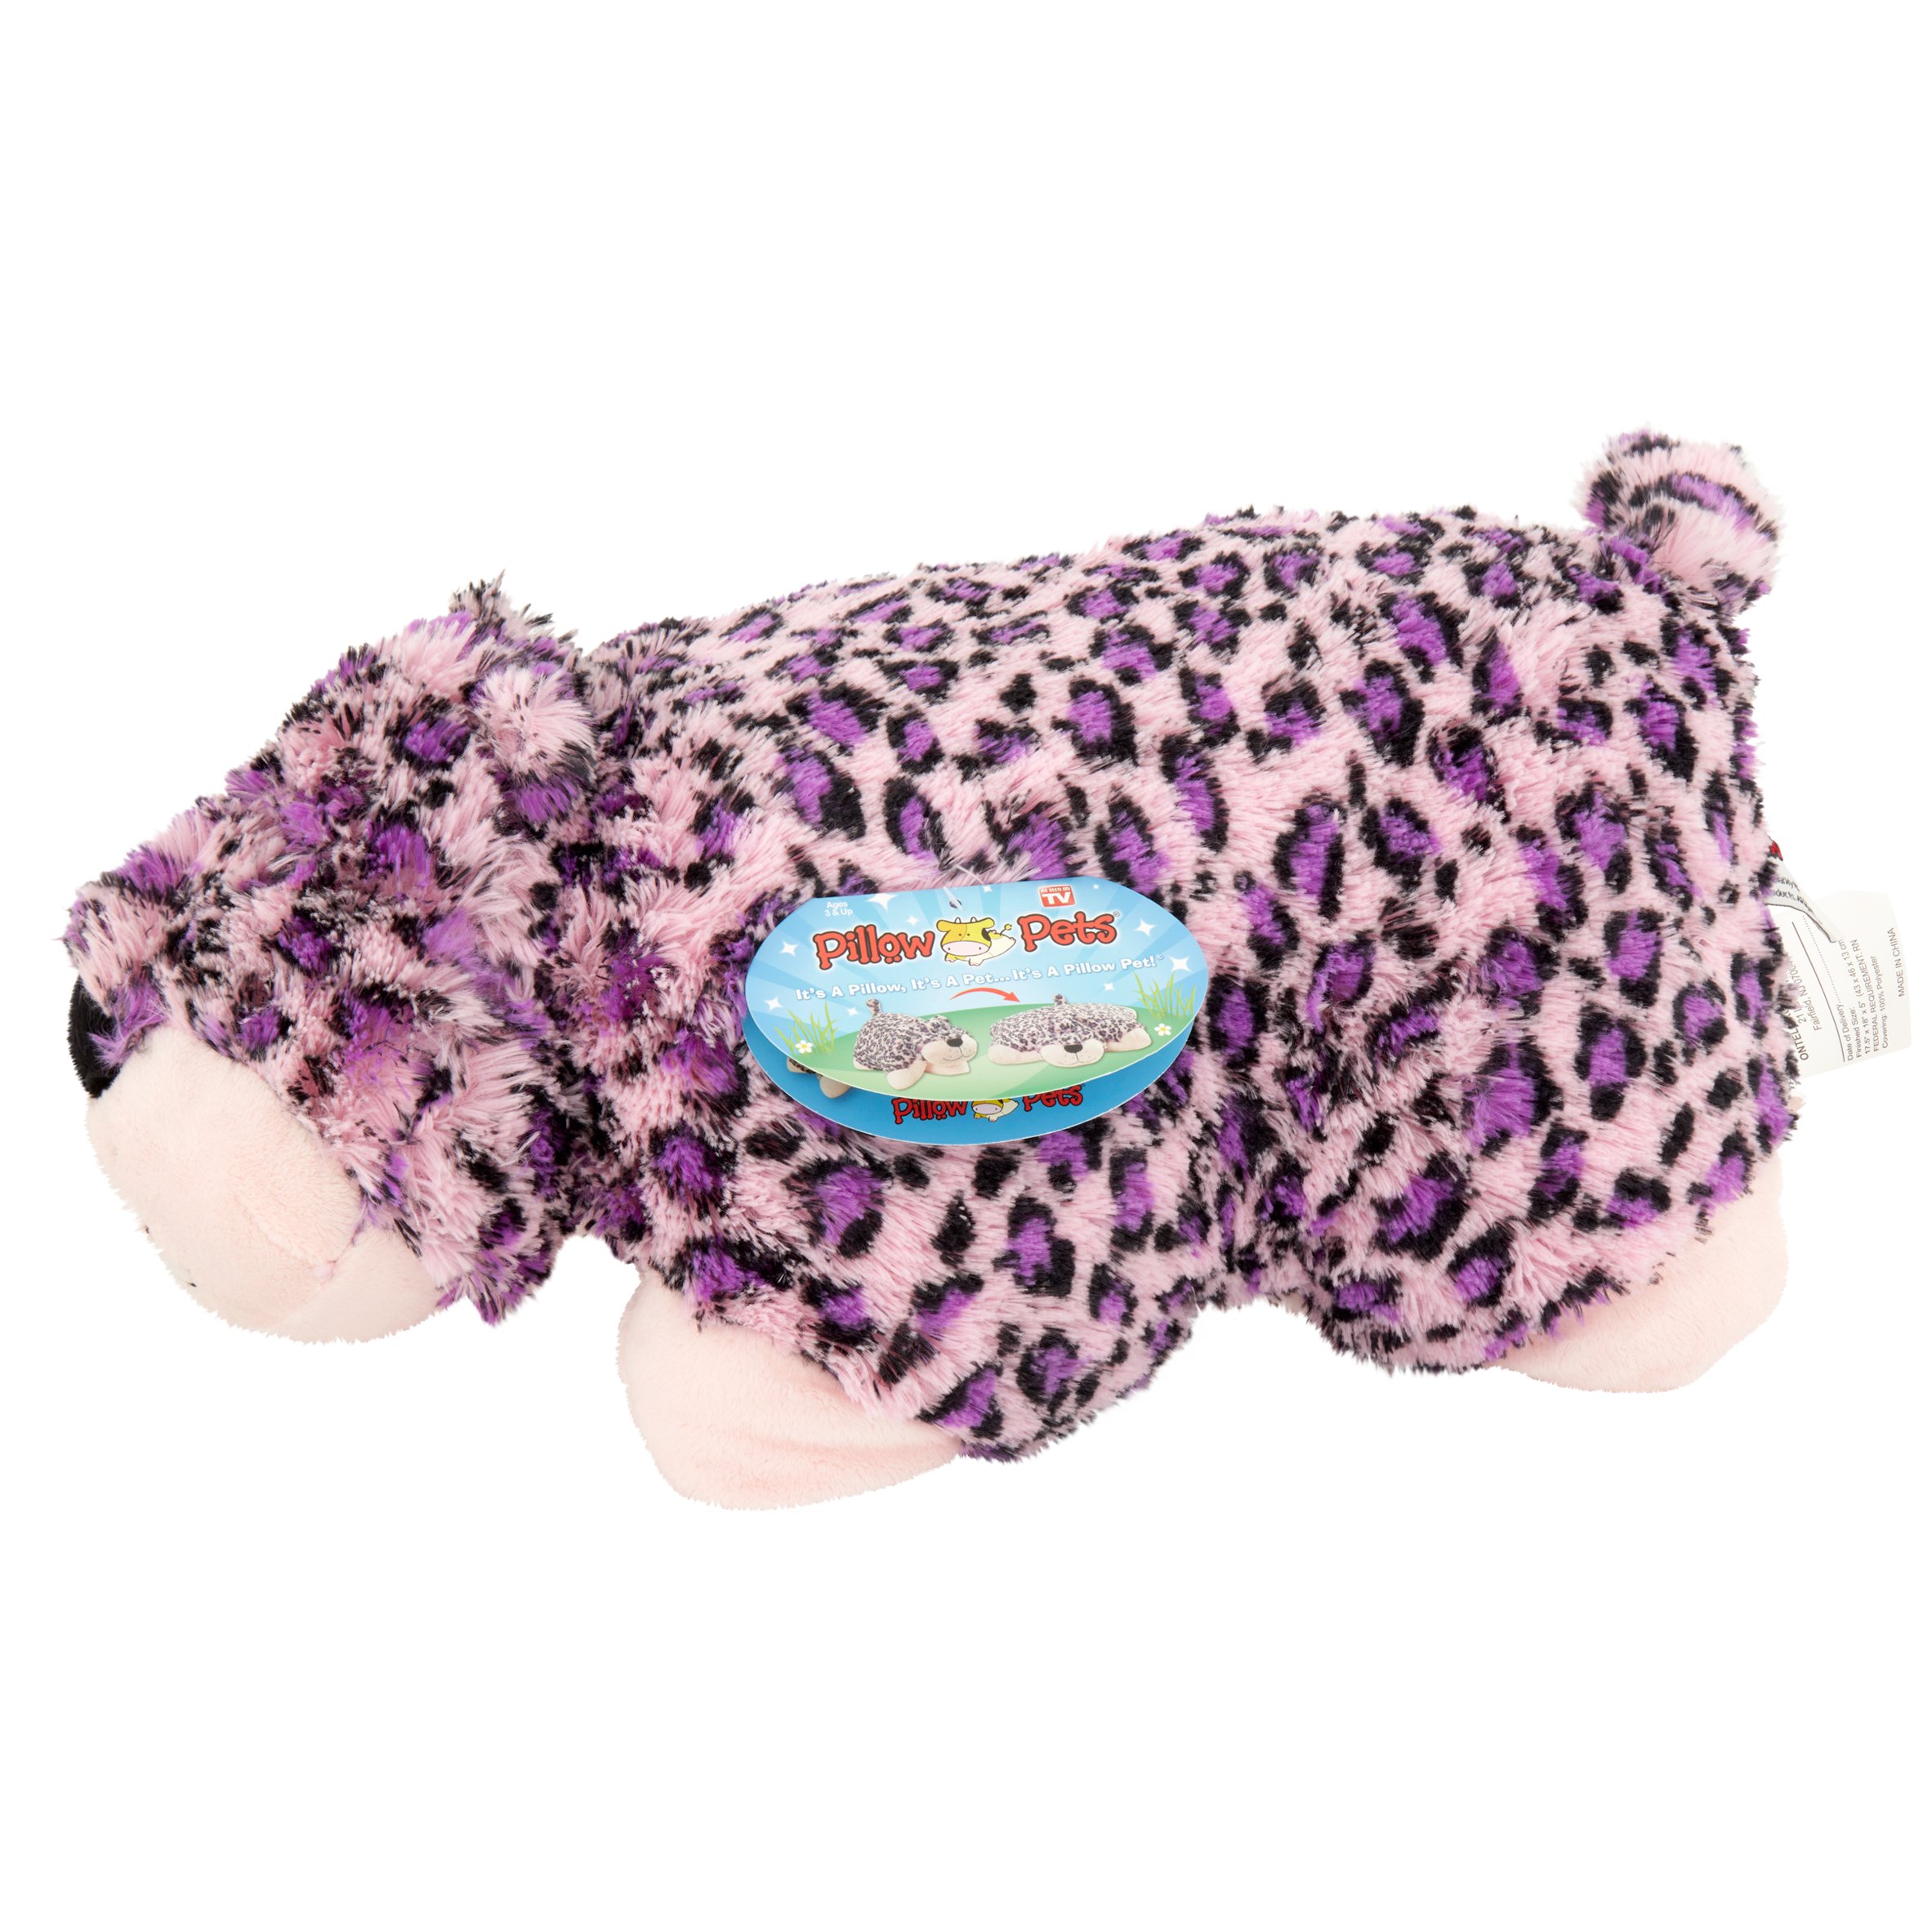 As Seen on TV Pillow Pet, Pink Leopard - image 2 of 5